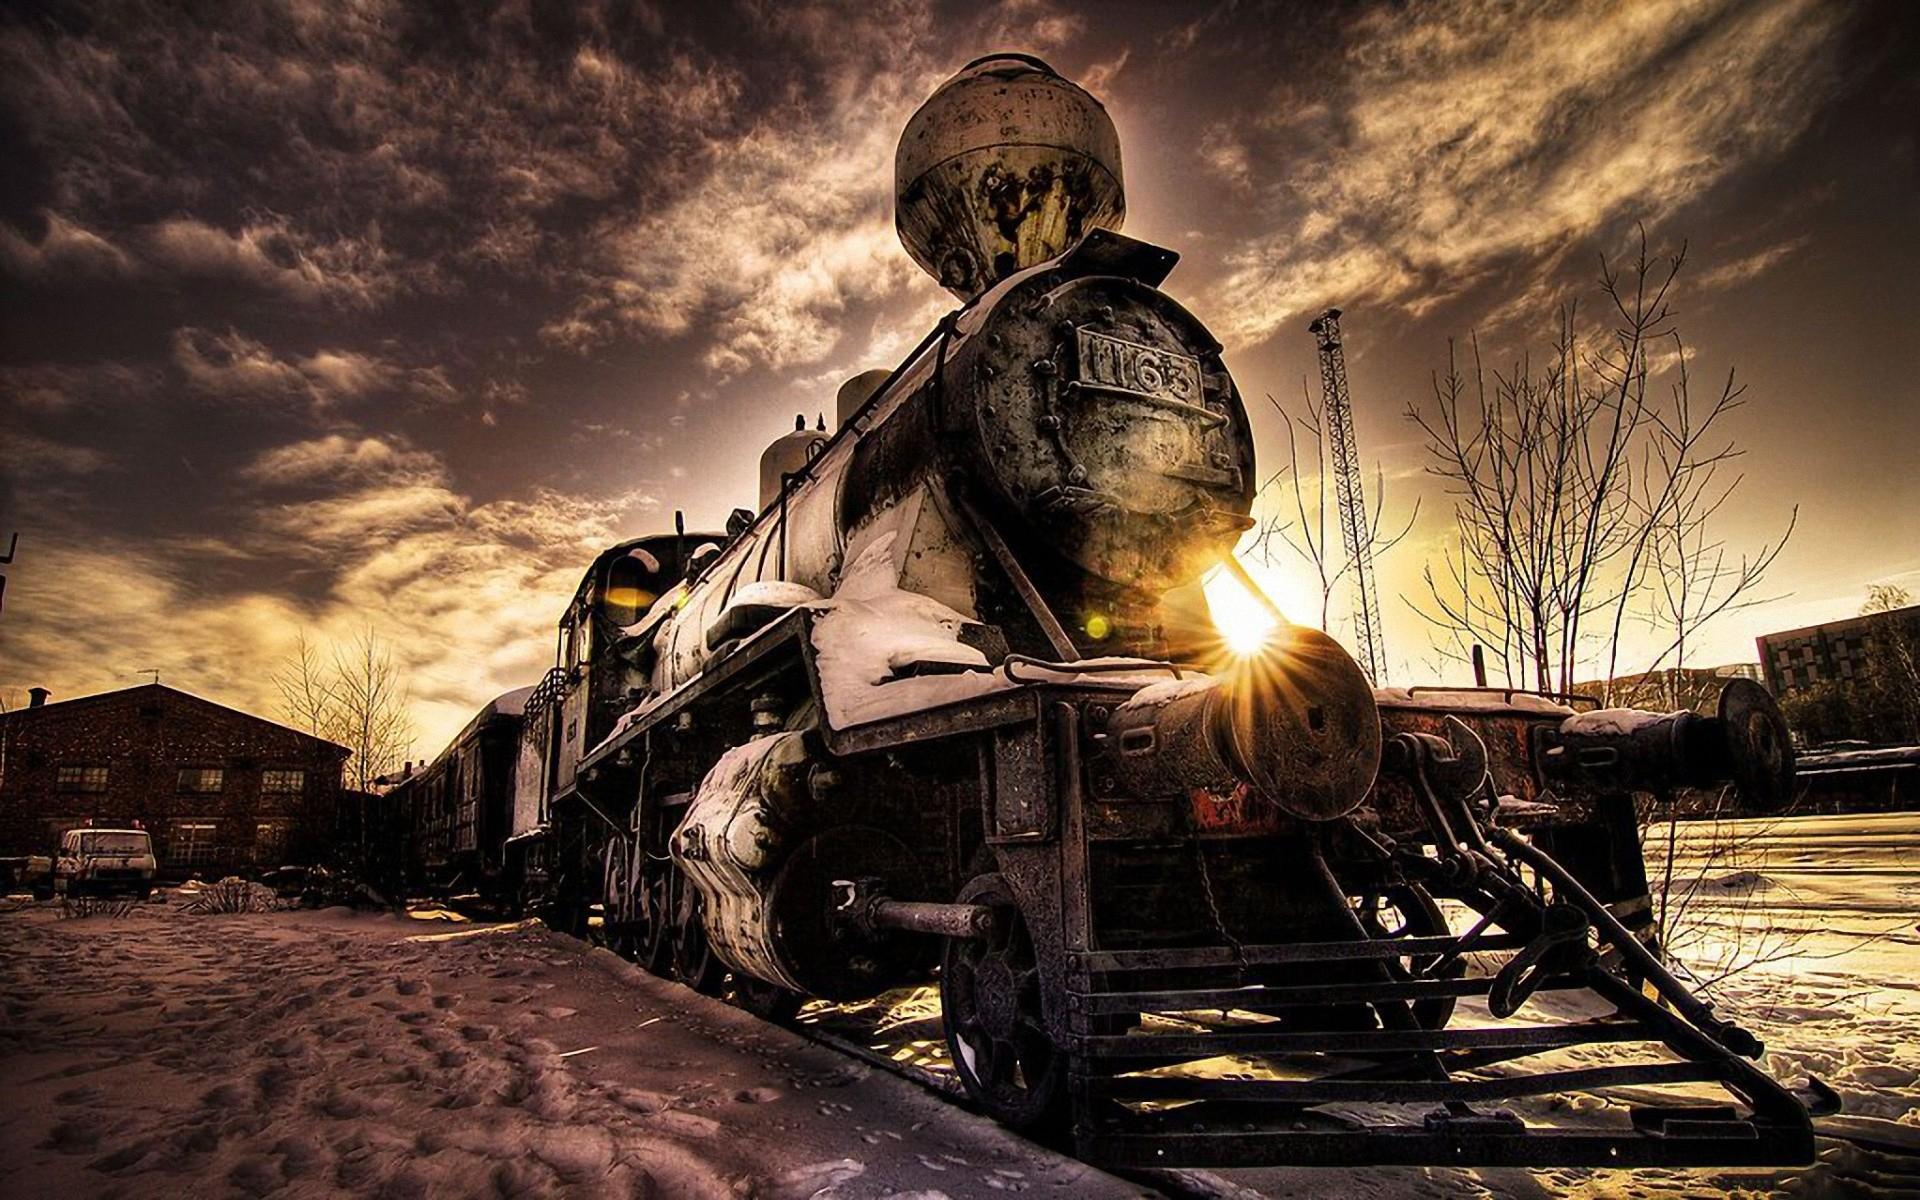 HD Fantastic steam train in winter s sunset hdr Wallpaper Free